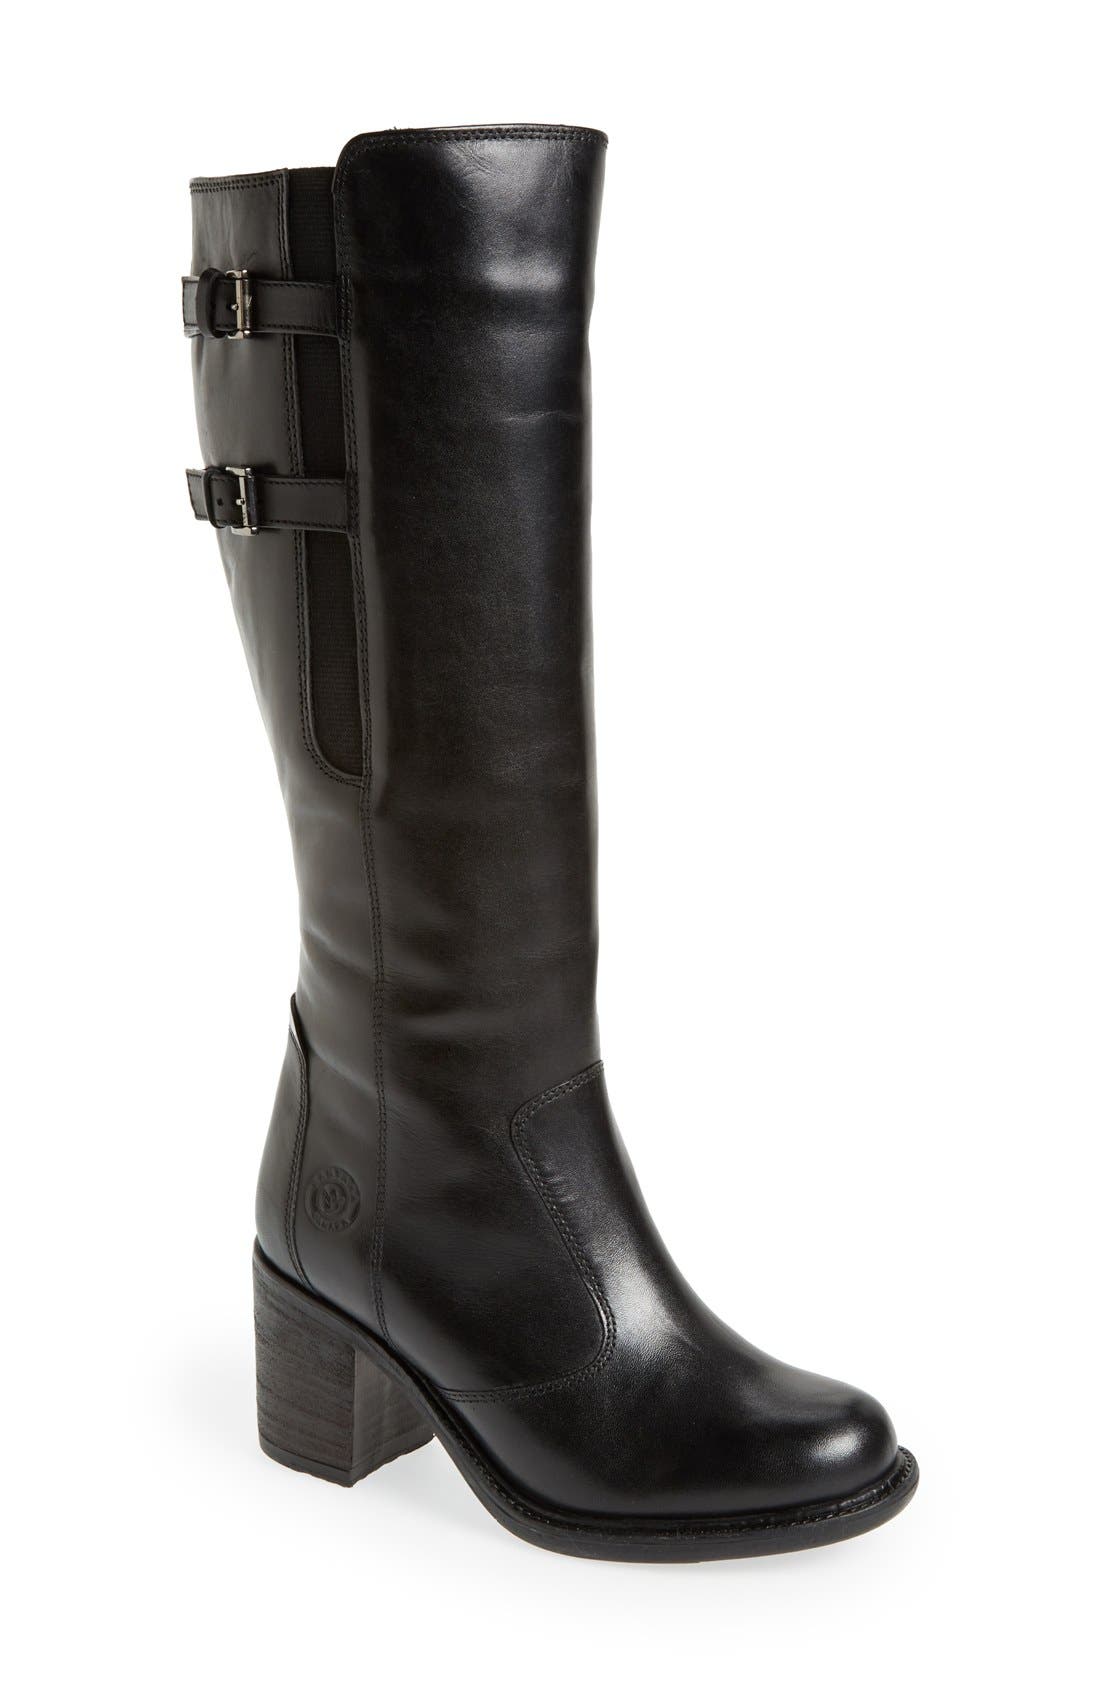 waterproof leather boots canada